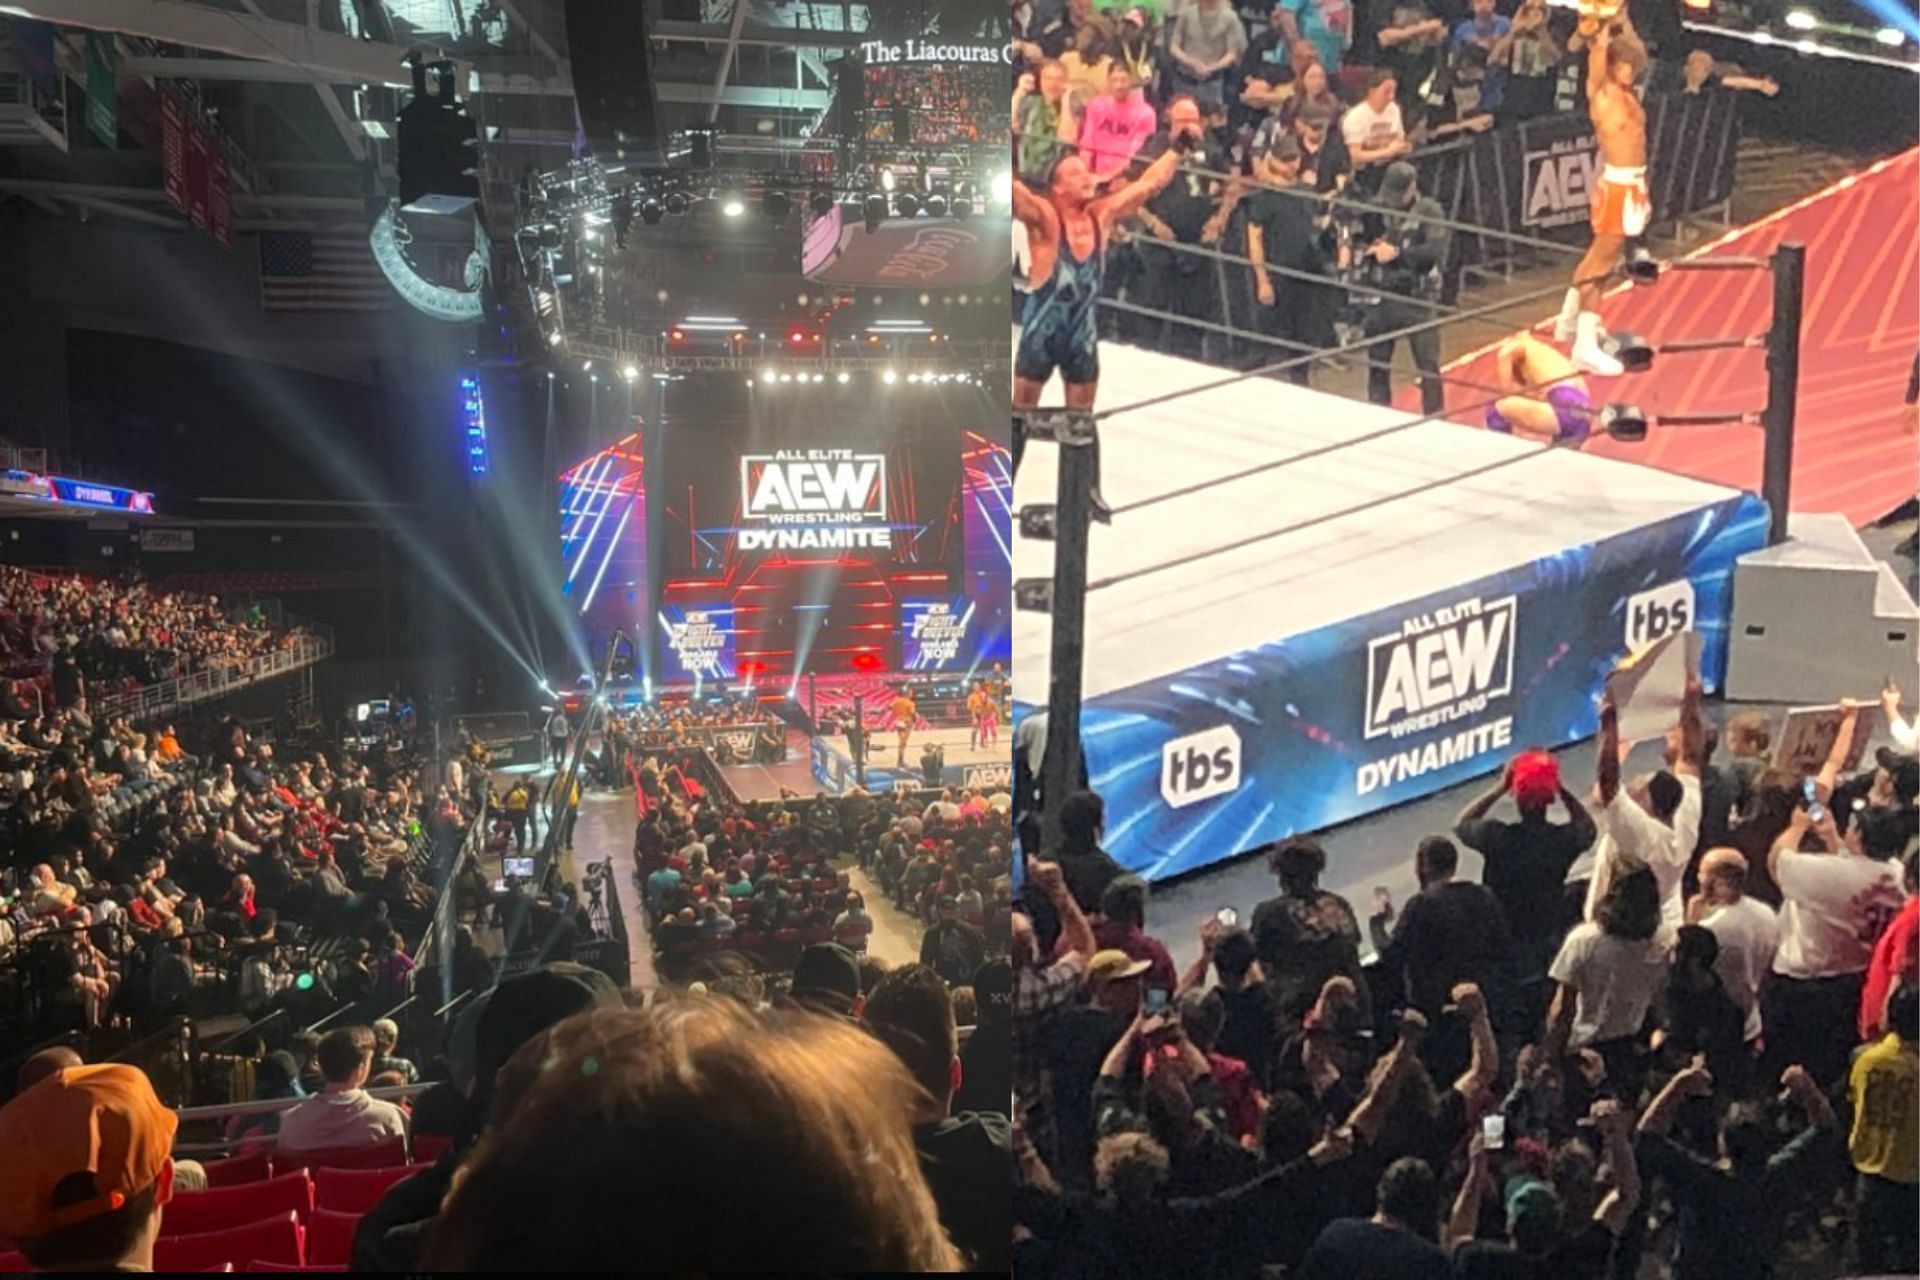 AEW is seemingly filling arenas